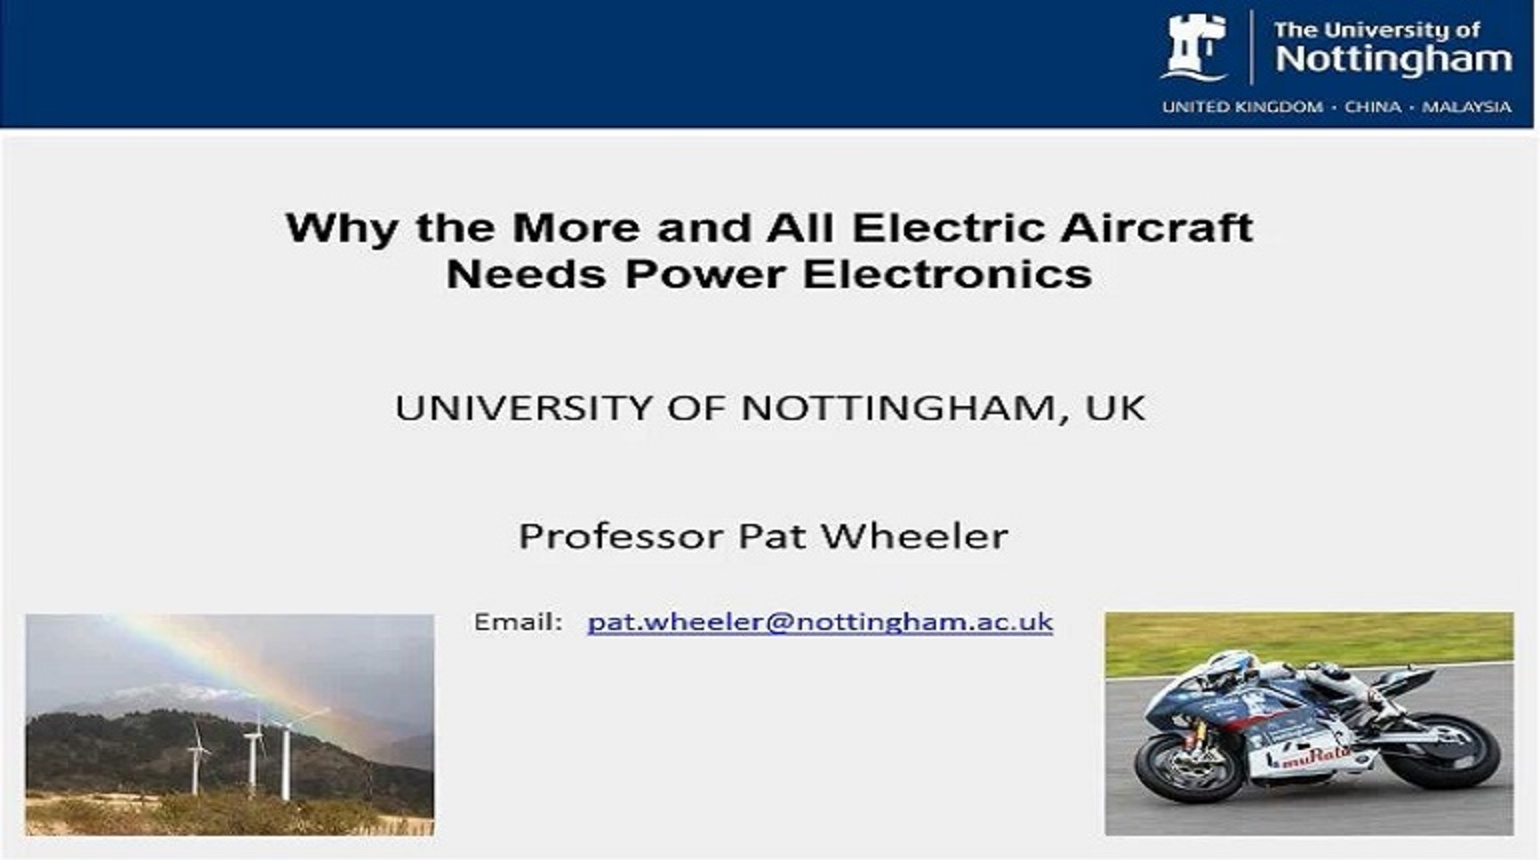 Technology Development from the More Electric Aircraft to All Electric Flight Video